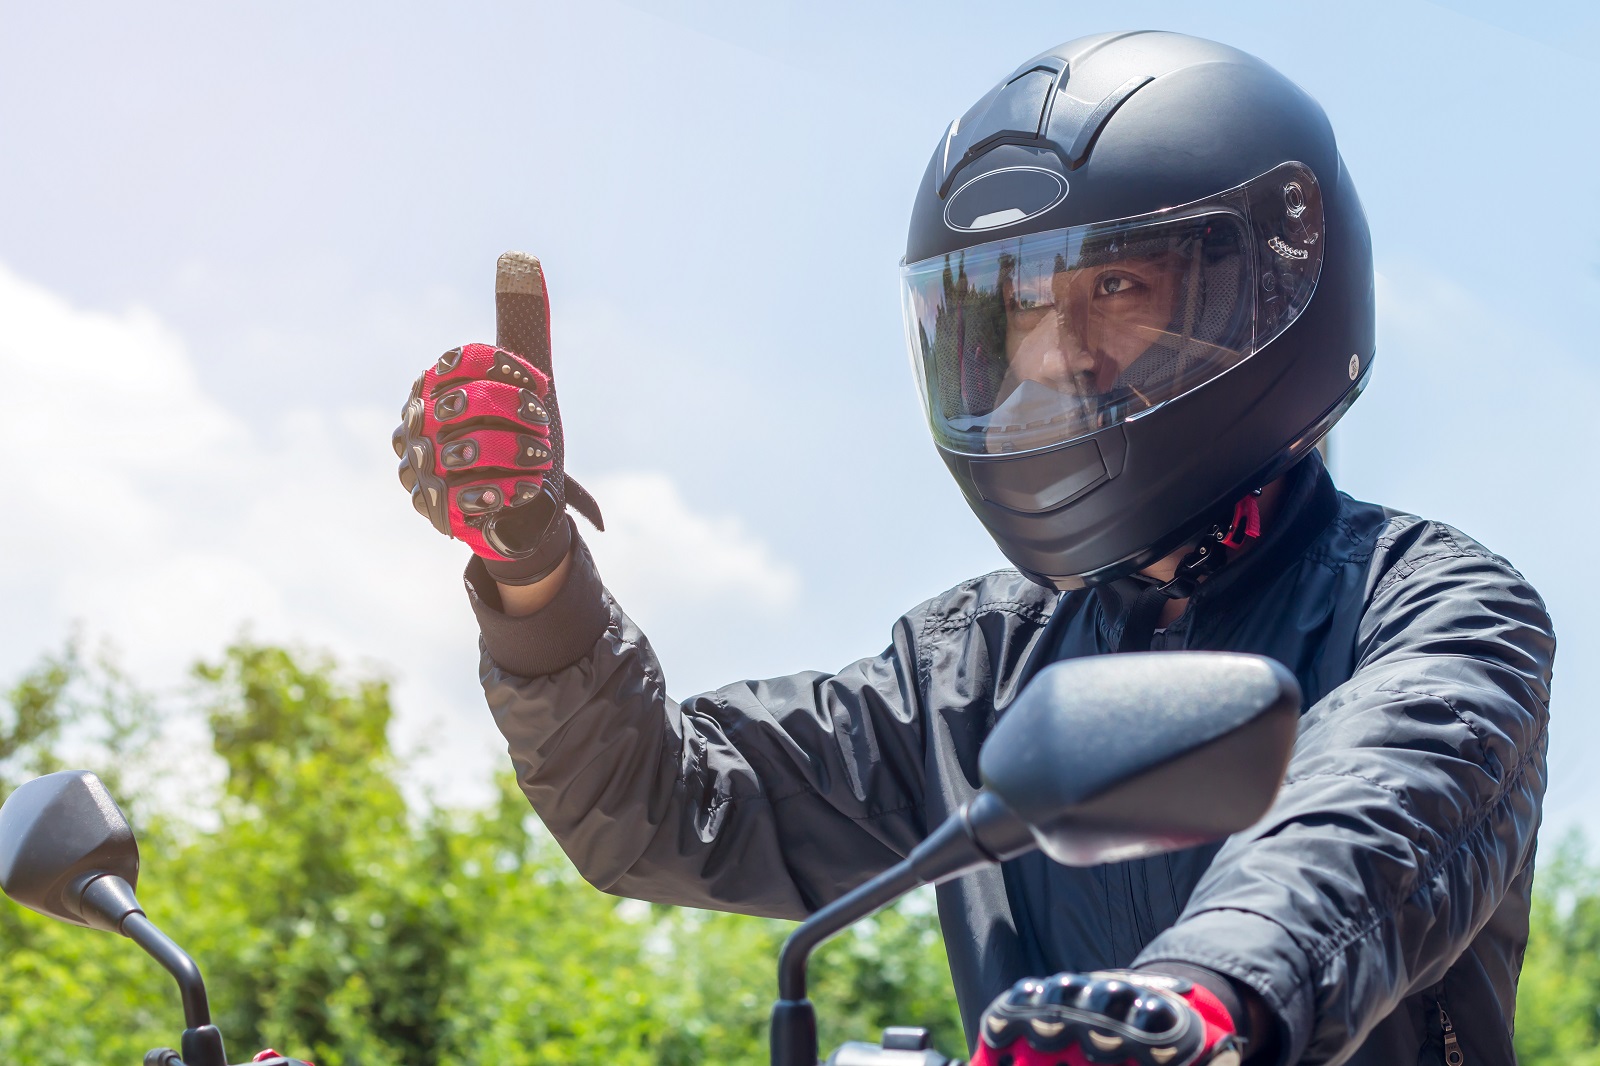 <p class="wp-caption-text">Image Credit: Shutterstock / Somnuek saelim</p>  <p><span>Are you ready to hit the road with confidence? With the right motorcycle gear, you can enjoy your ride while staying safe and comfortable. Make sure you have all these essentials before your next adventure.\</span></p>